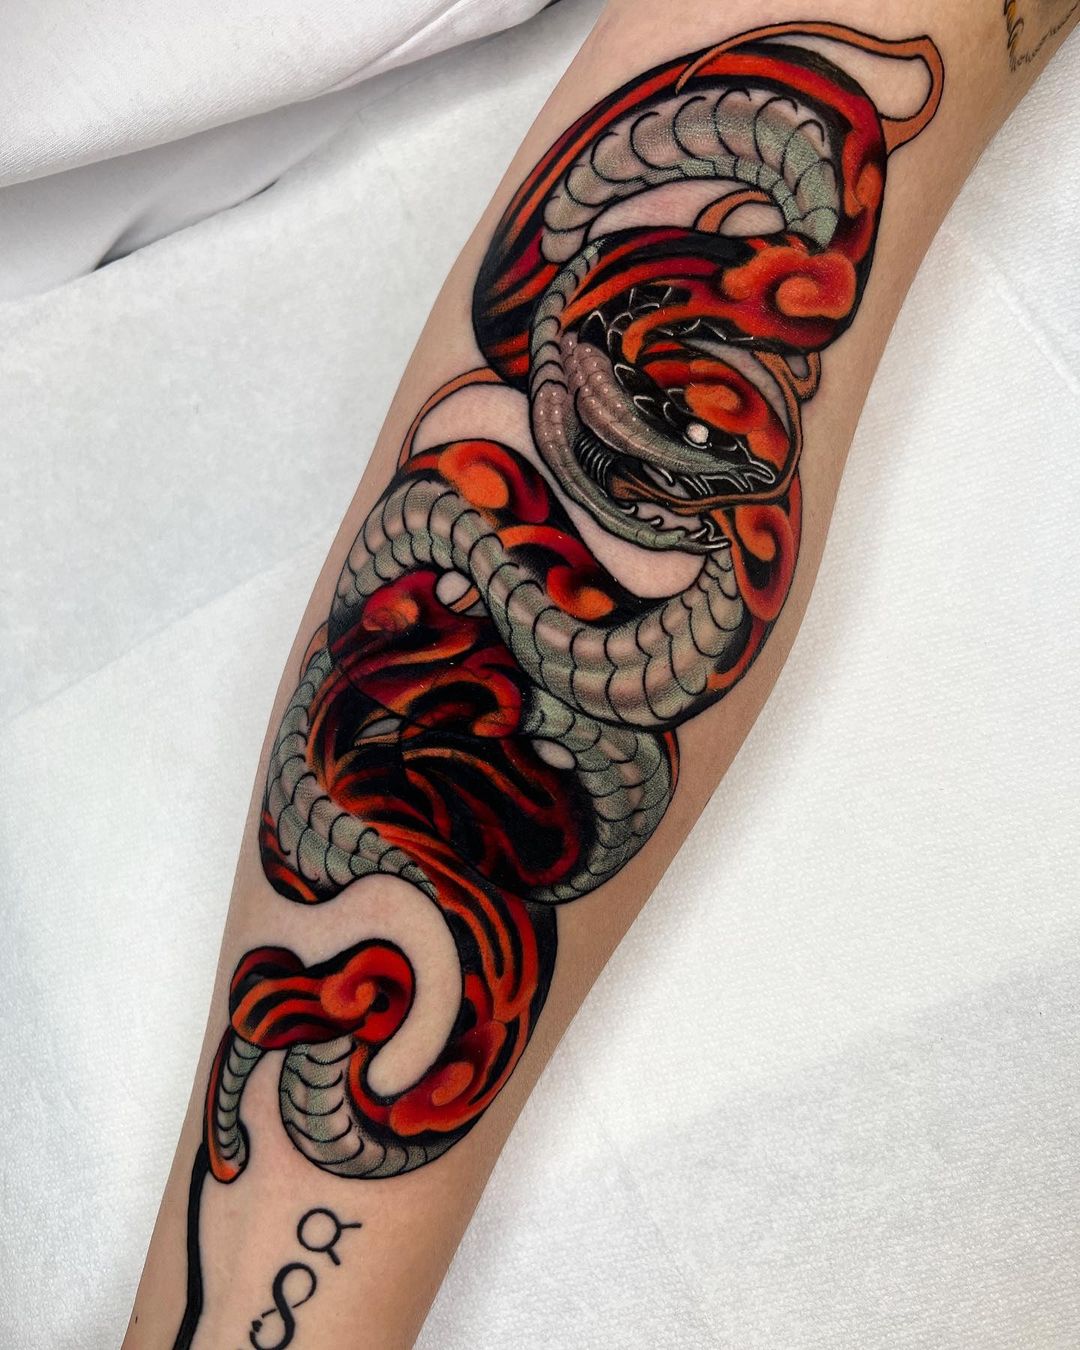 Black and Red Snake Japanese Tattoo on Arm